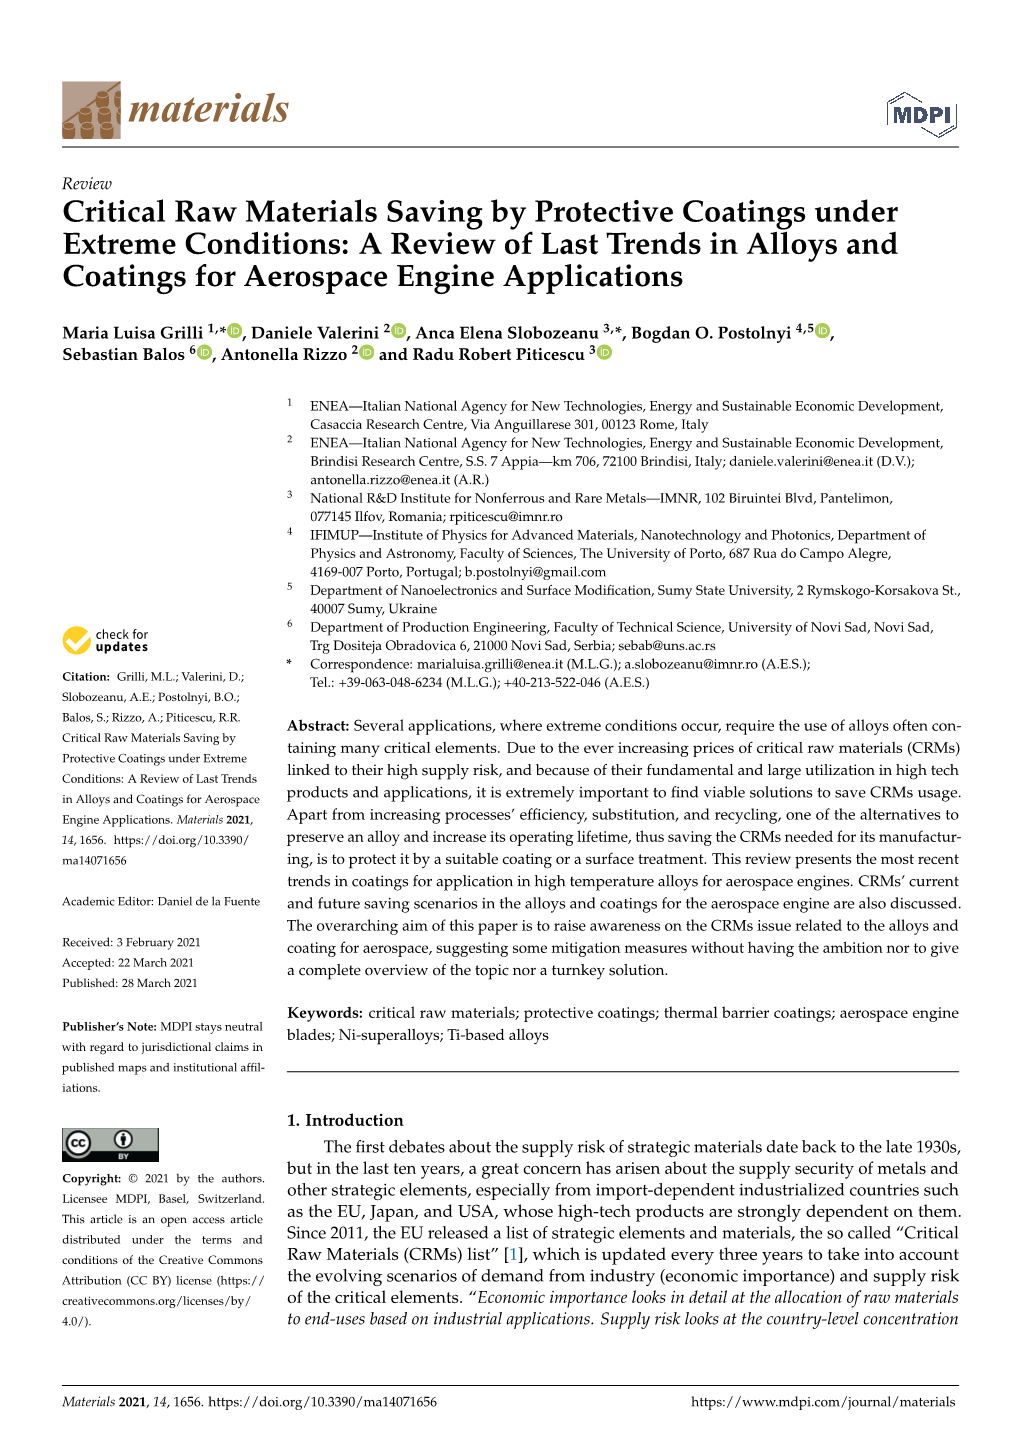 Critical Raw Materials Saving by Protective Coatings Under Extreme Conditions: a Review of Last Trends in Alloys and Coatings for Aerospace Engine Applications